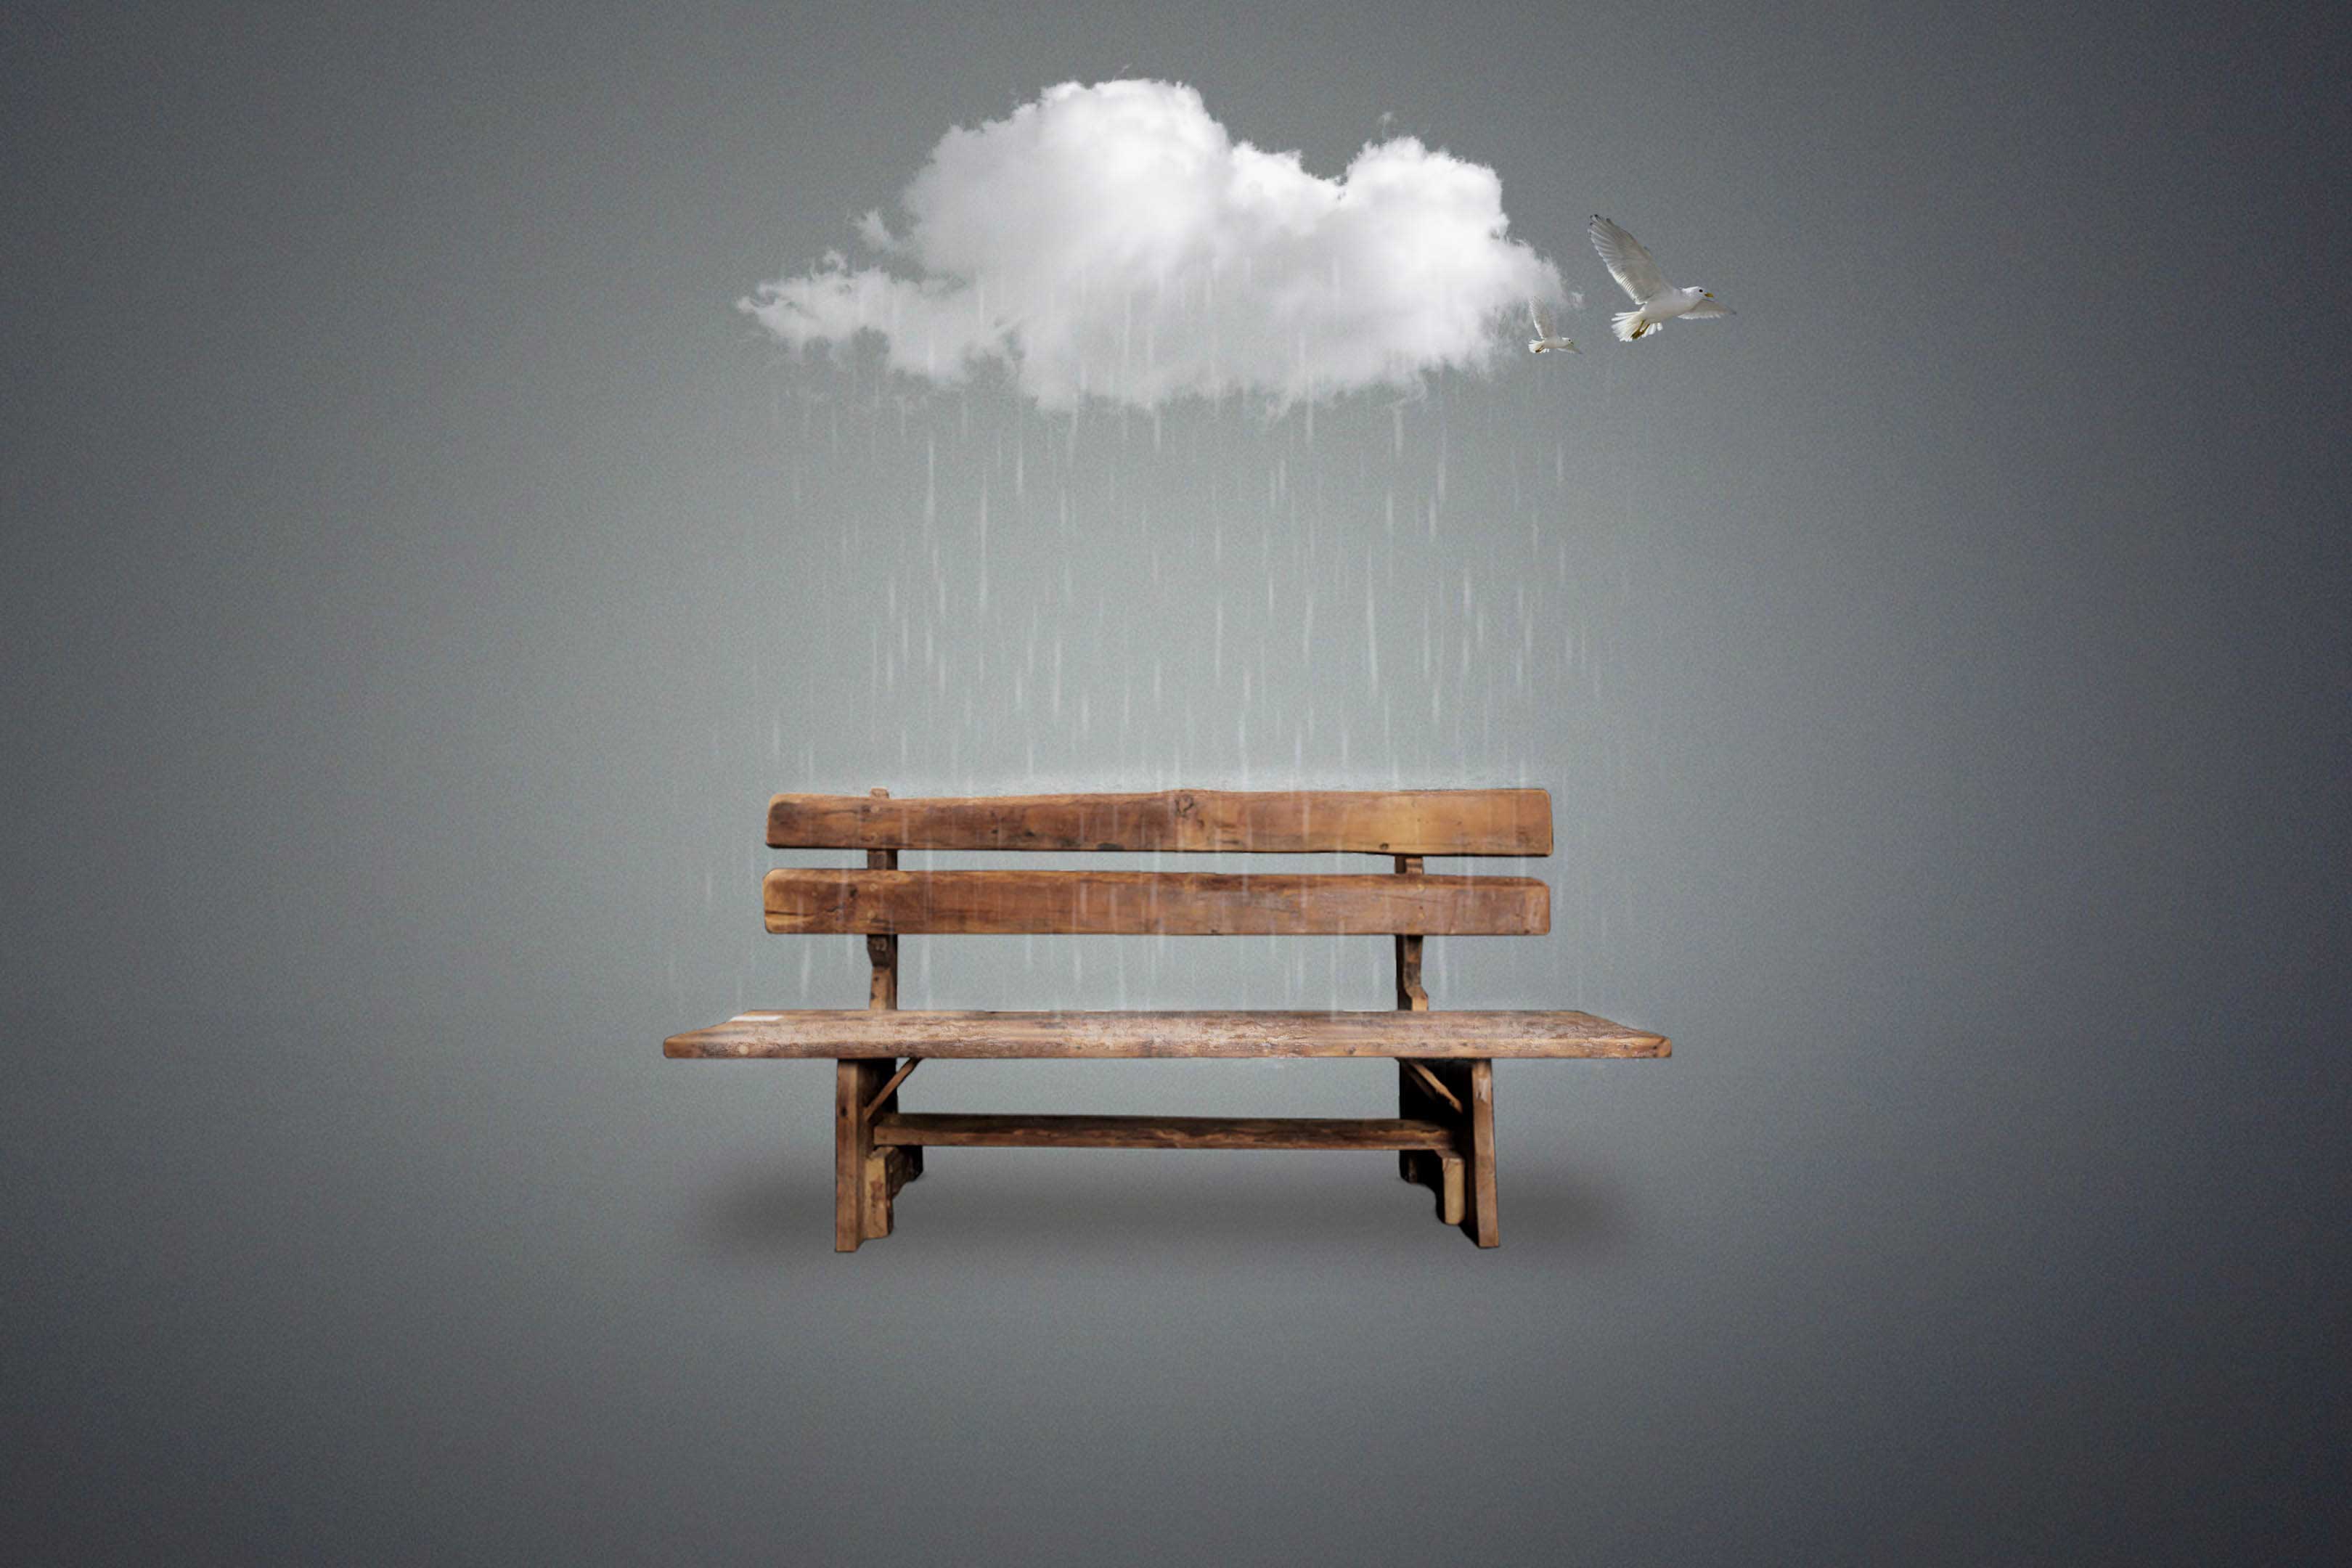 Raining On Table Background Free Stock Image [ Download ]